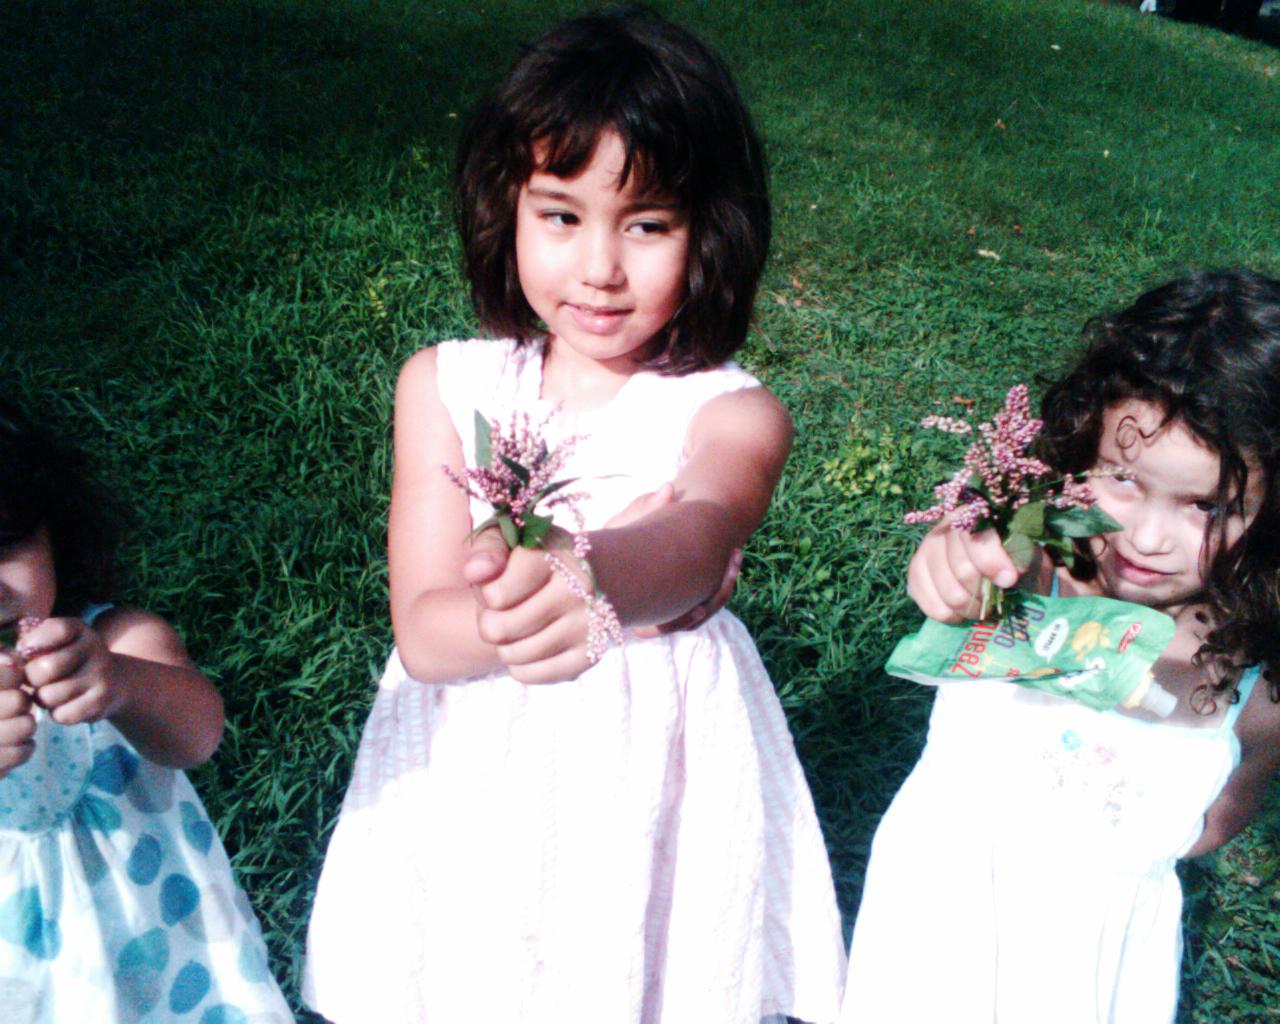 two girls are posing for the camera holding flowers